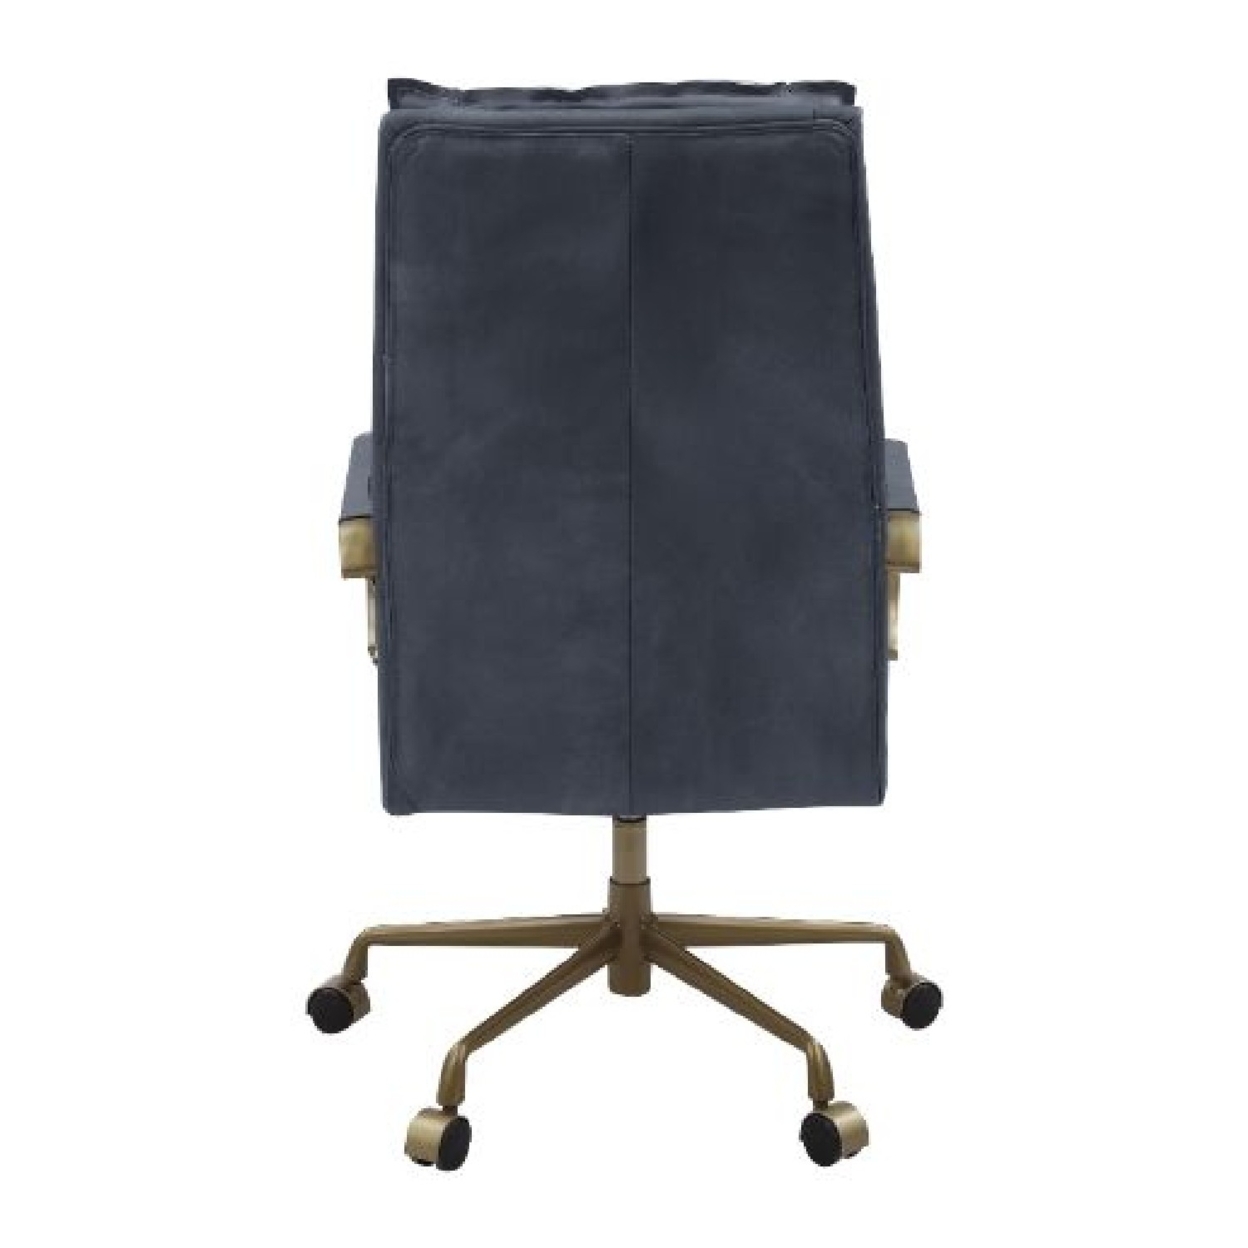 Office Chair With Leatherette Seat And Tufted Details, Gray- Saltoro Sherpi